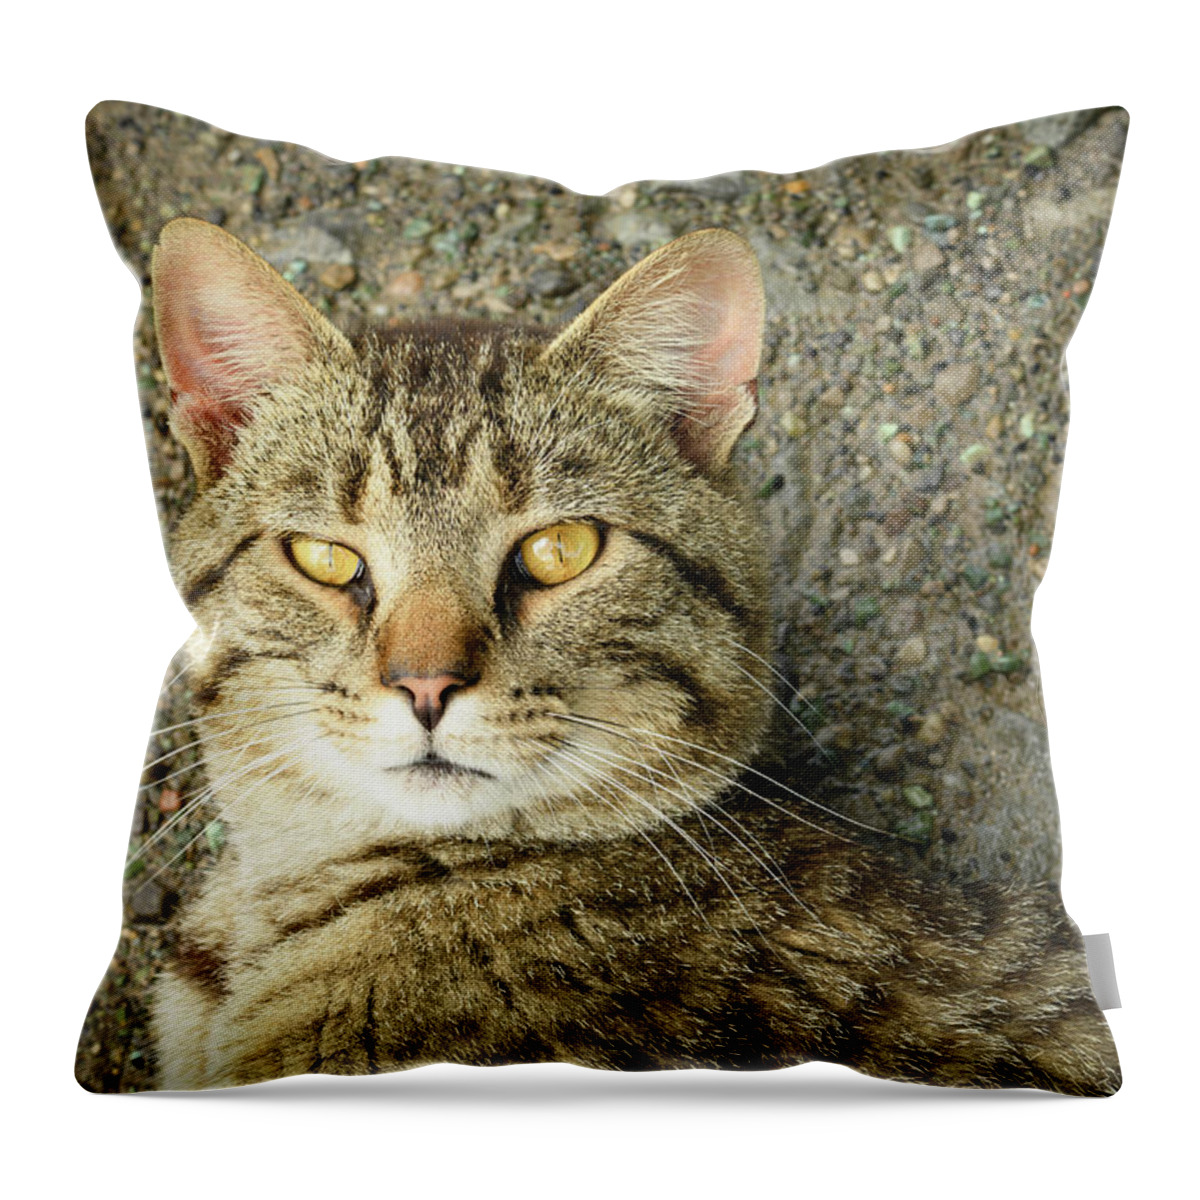 Cat Throw Pillow featuring the photograph Cool Farm Cat by Holden The Moment